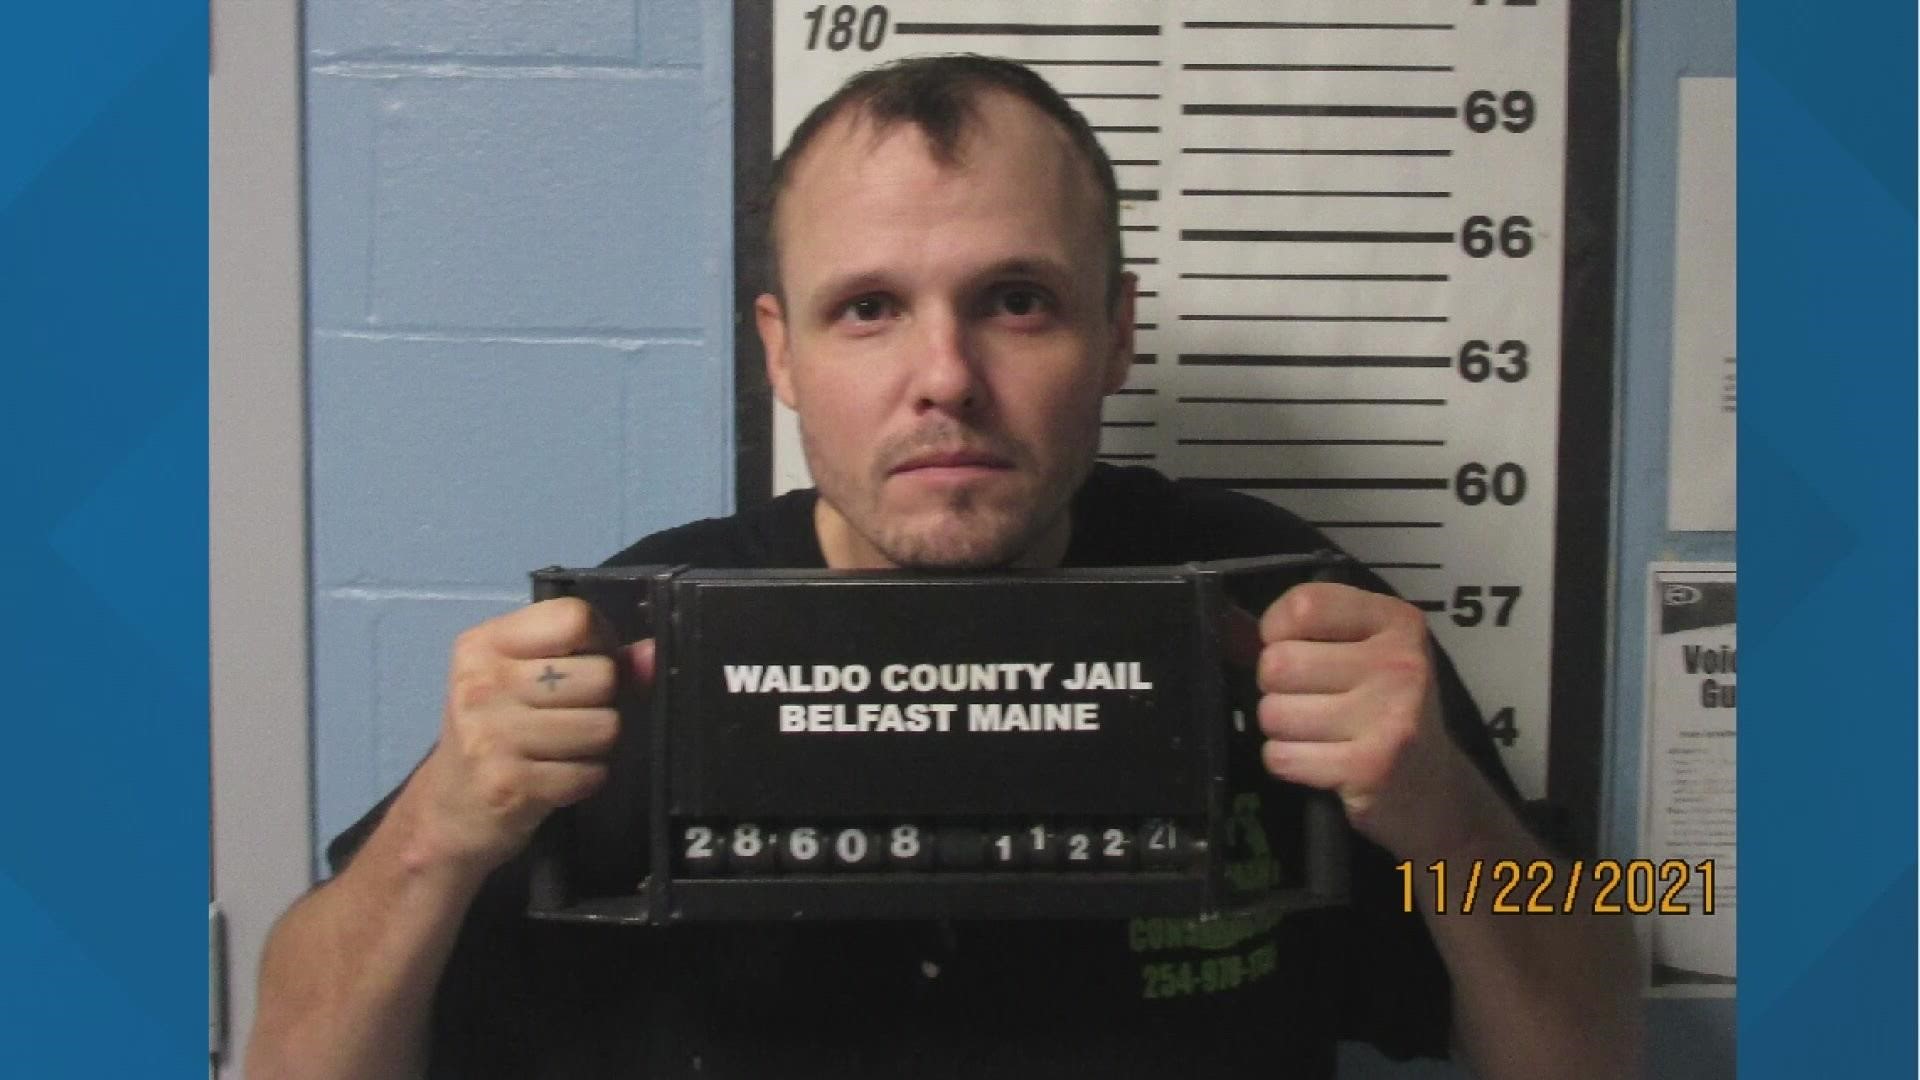 According to police, Steven Mathis confessed to sexually abusing several children, uploading images of the abuse online, and sharing those images with others.